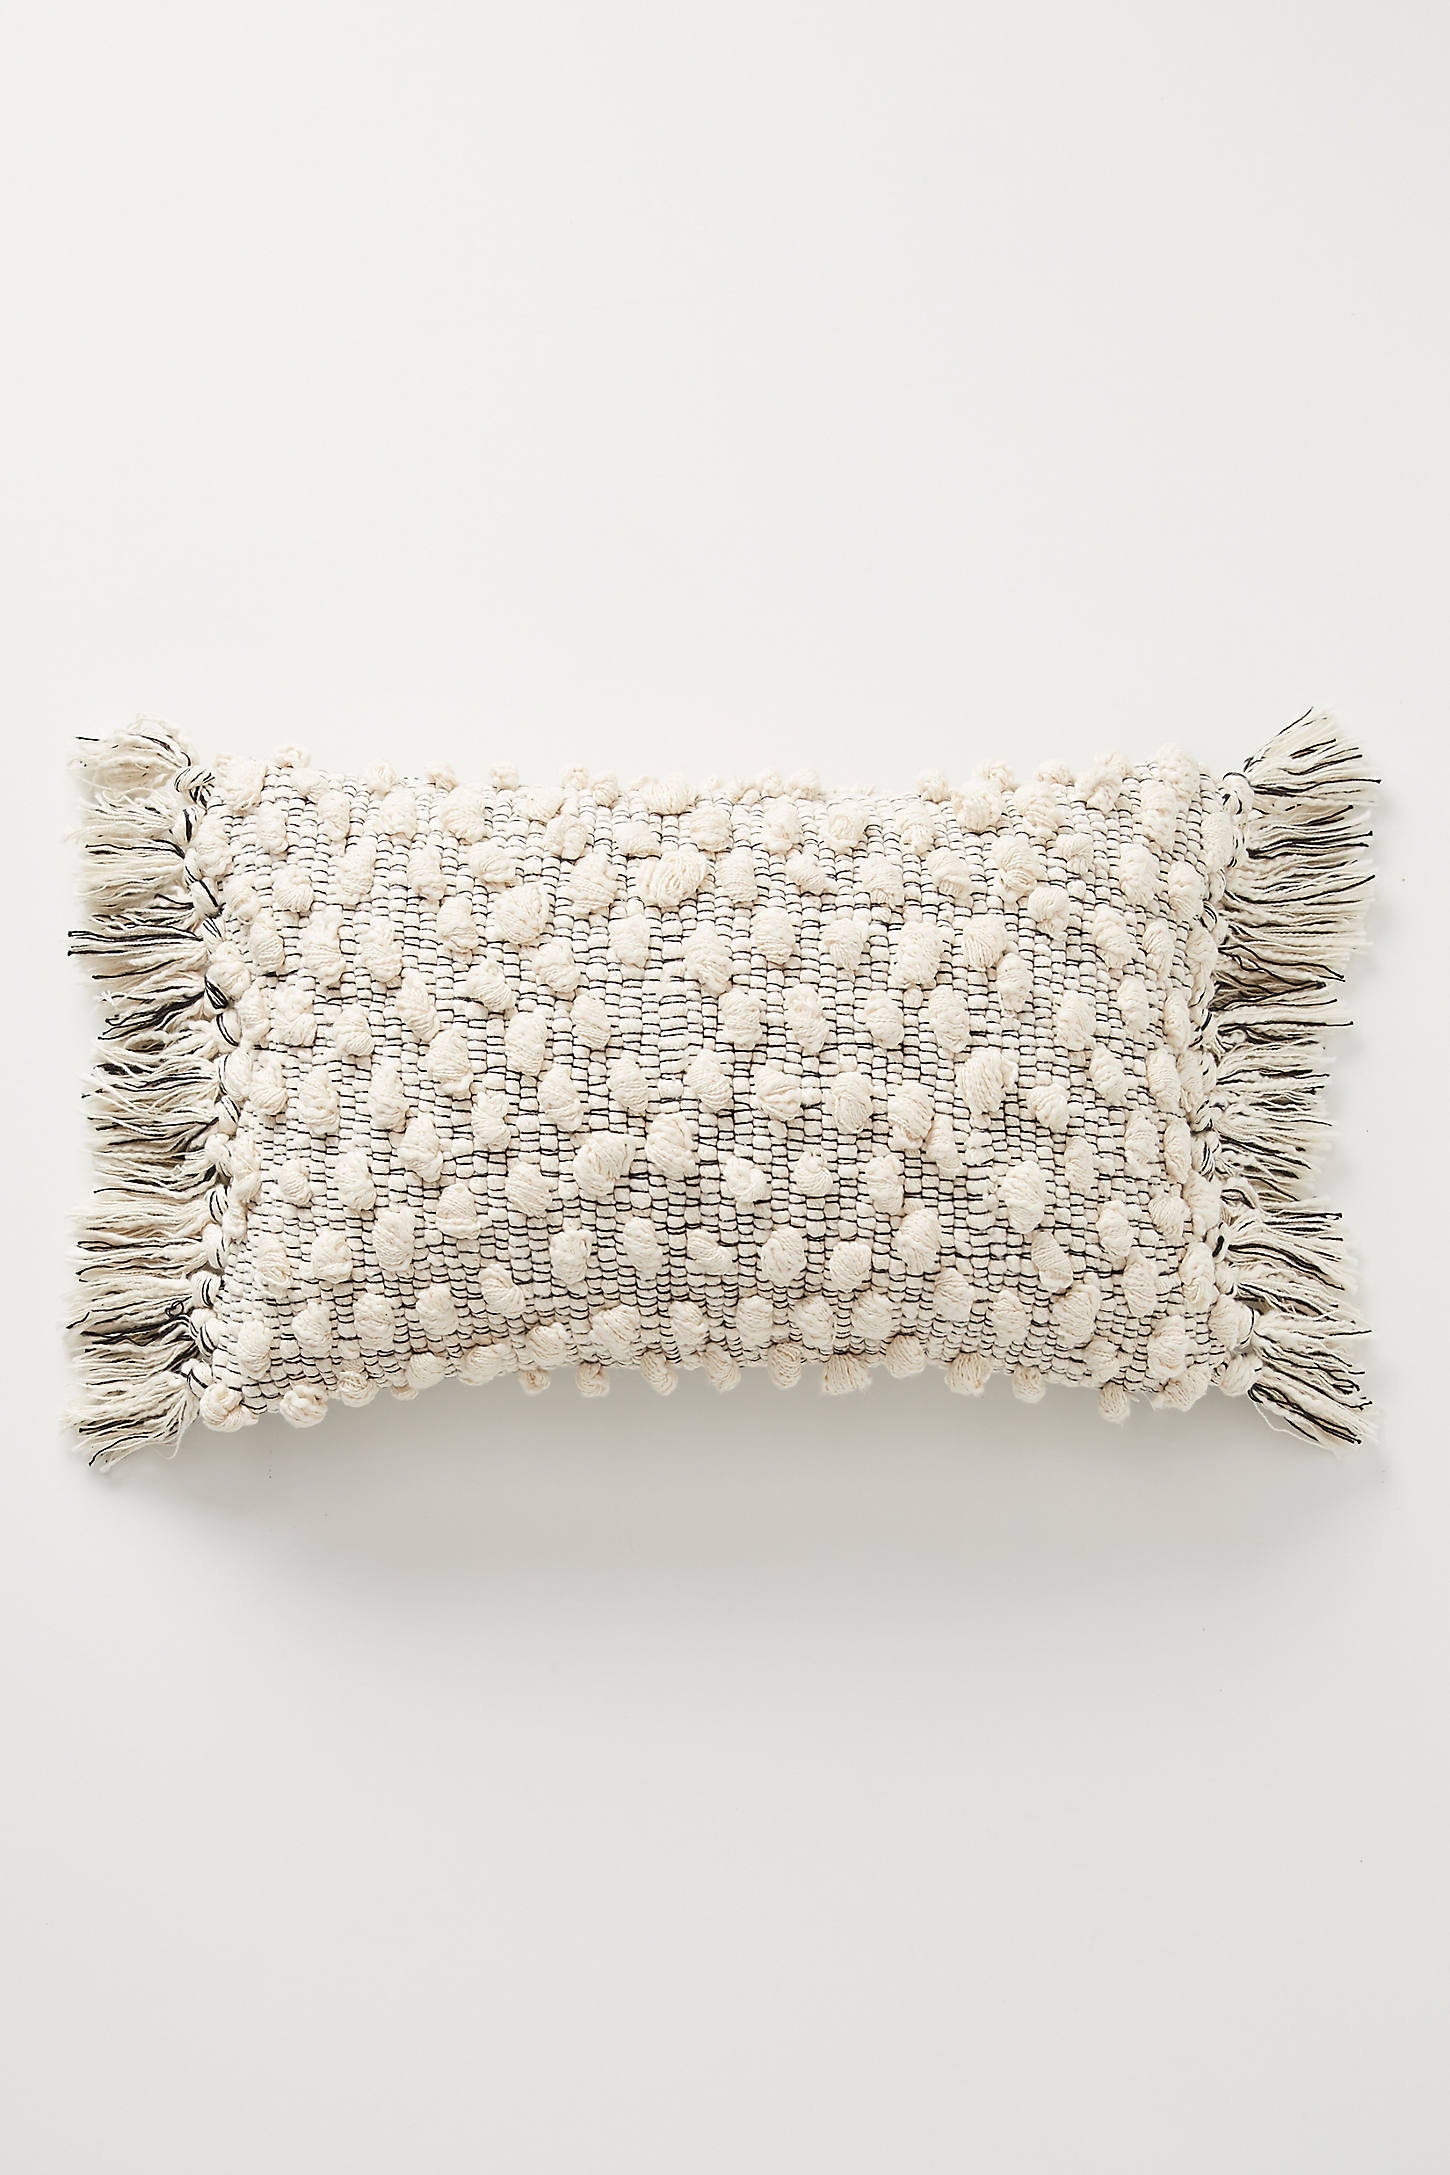 All Roads Yucca Pillow By All Roads Design in Beige Size 12" X 18" - Image 0